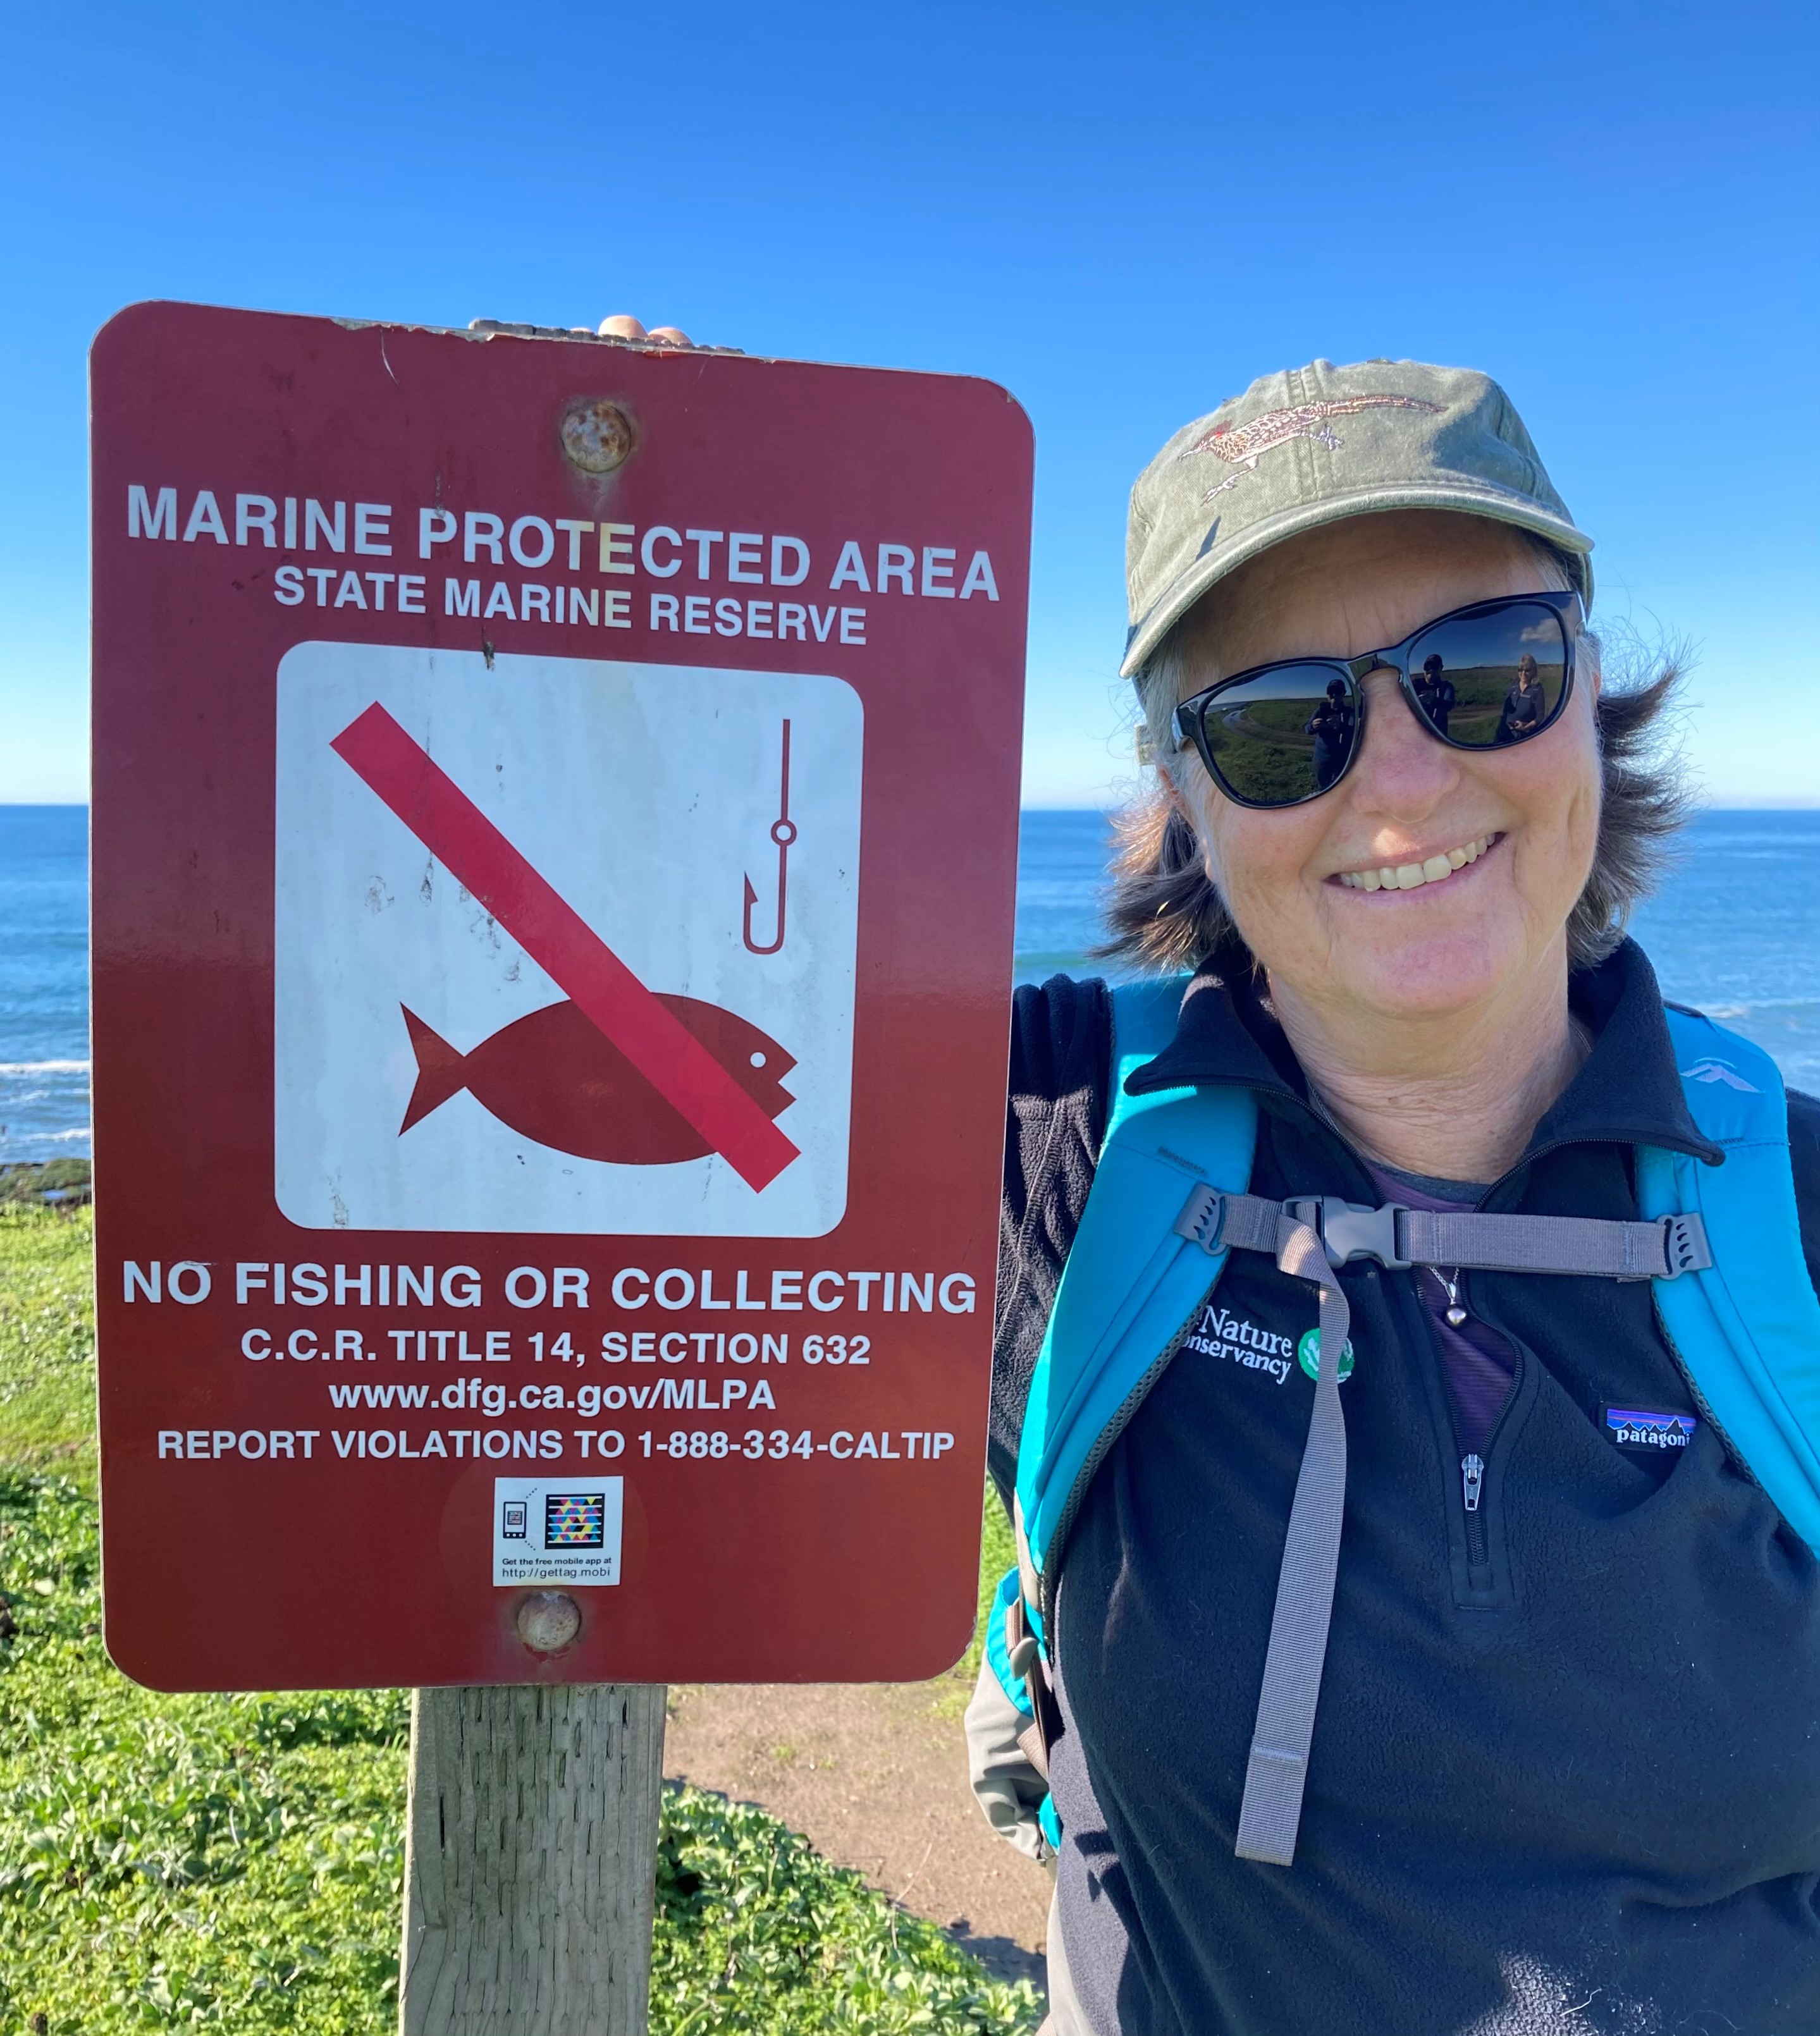 Mary Gleason next to a Marine Protected Area sign.